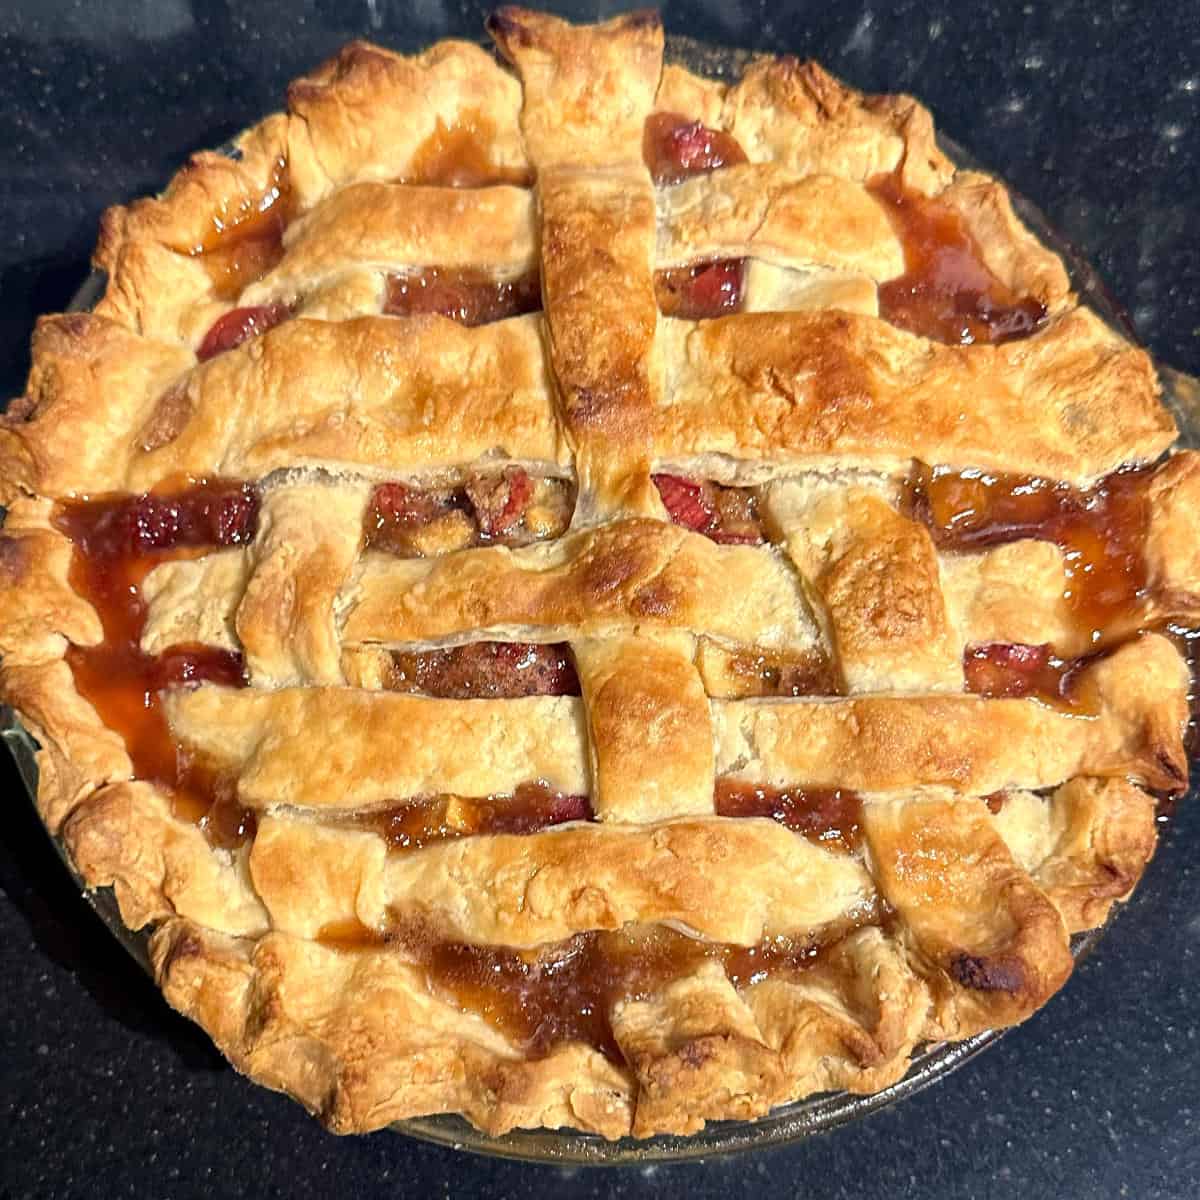 Rhubarb pie after baking.